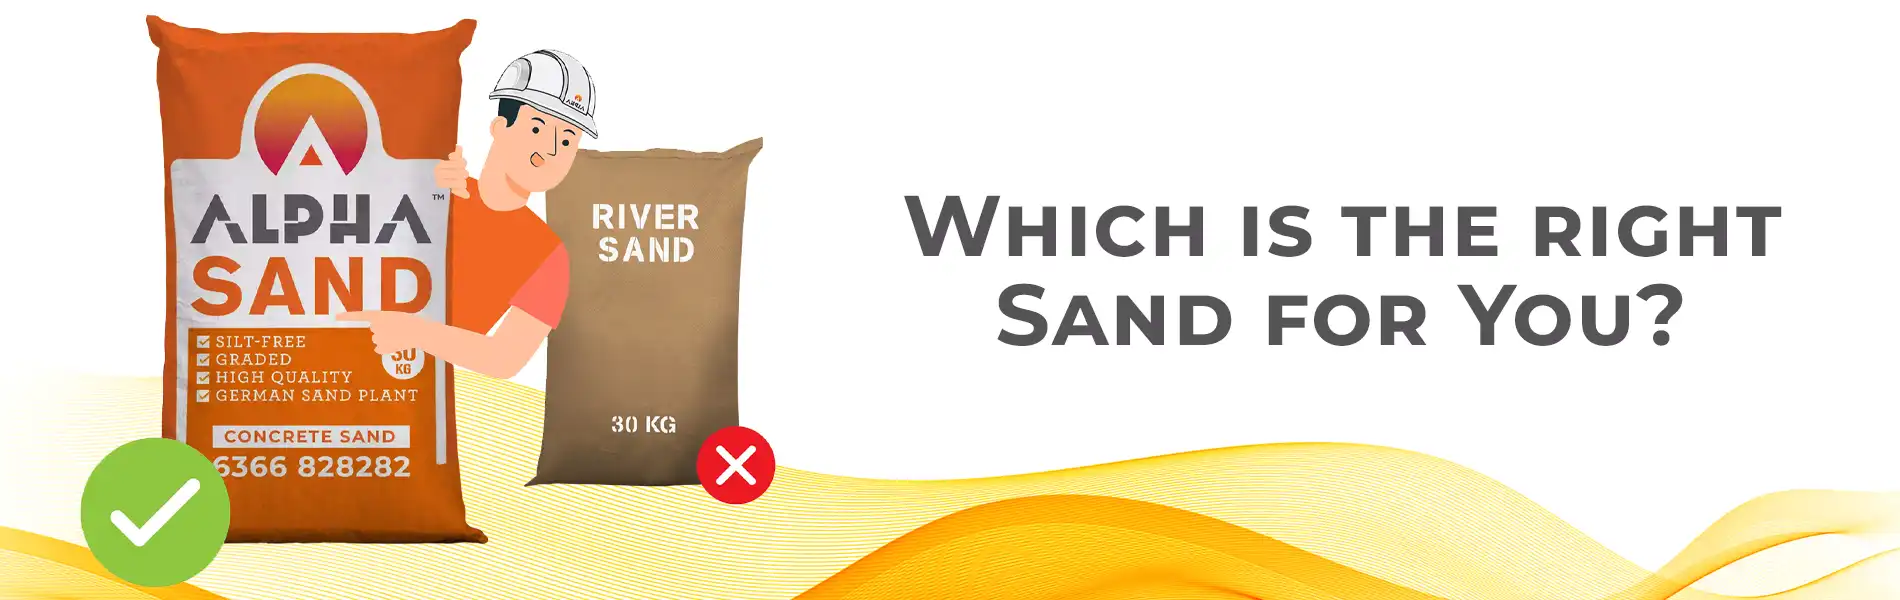 Which sand is best for you